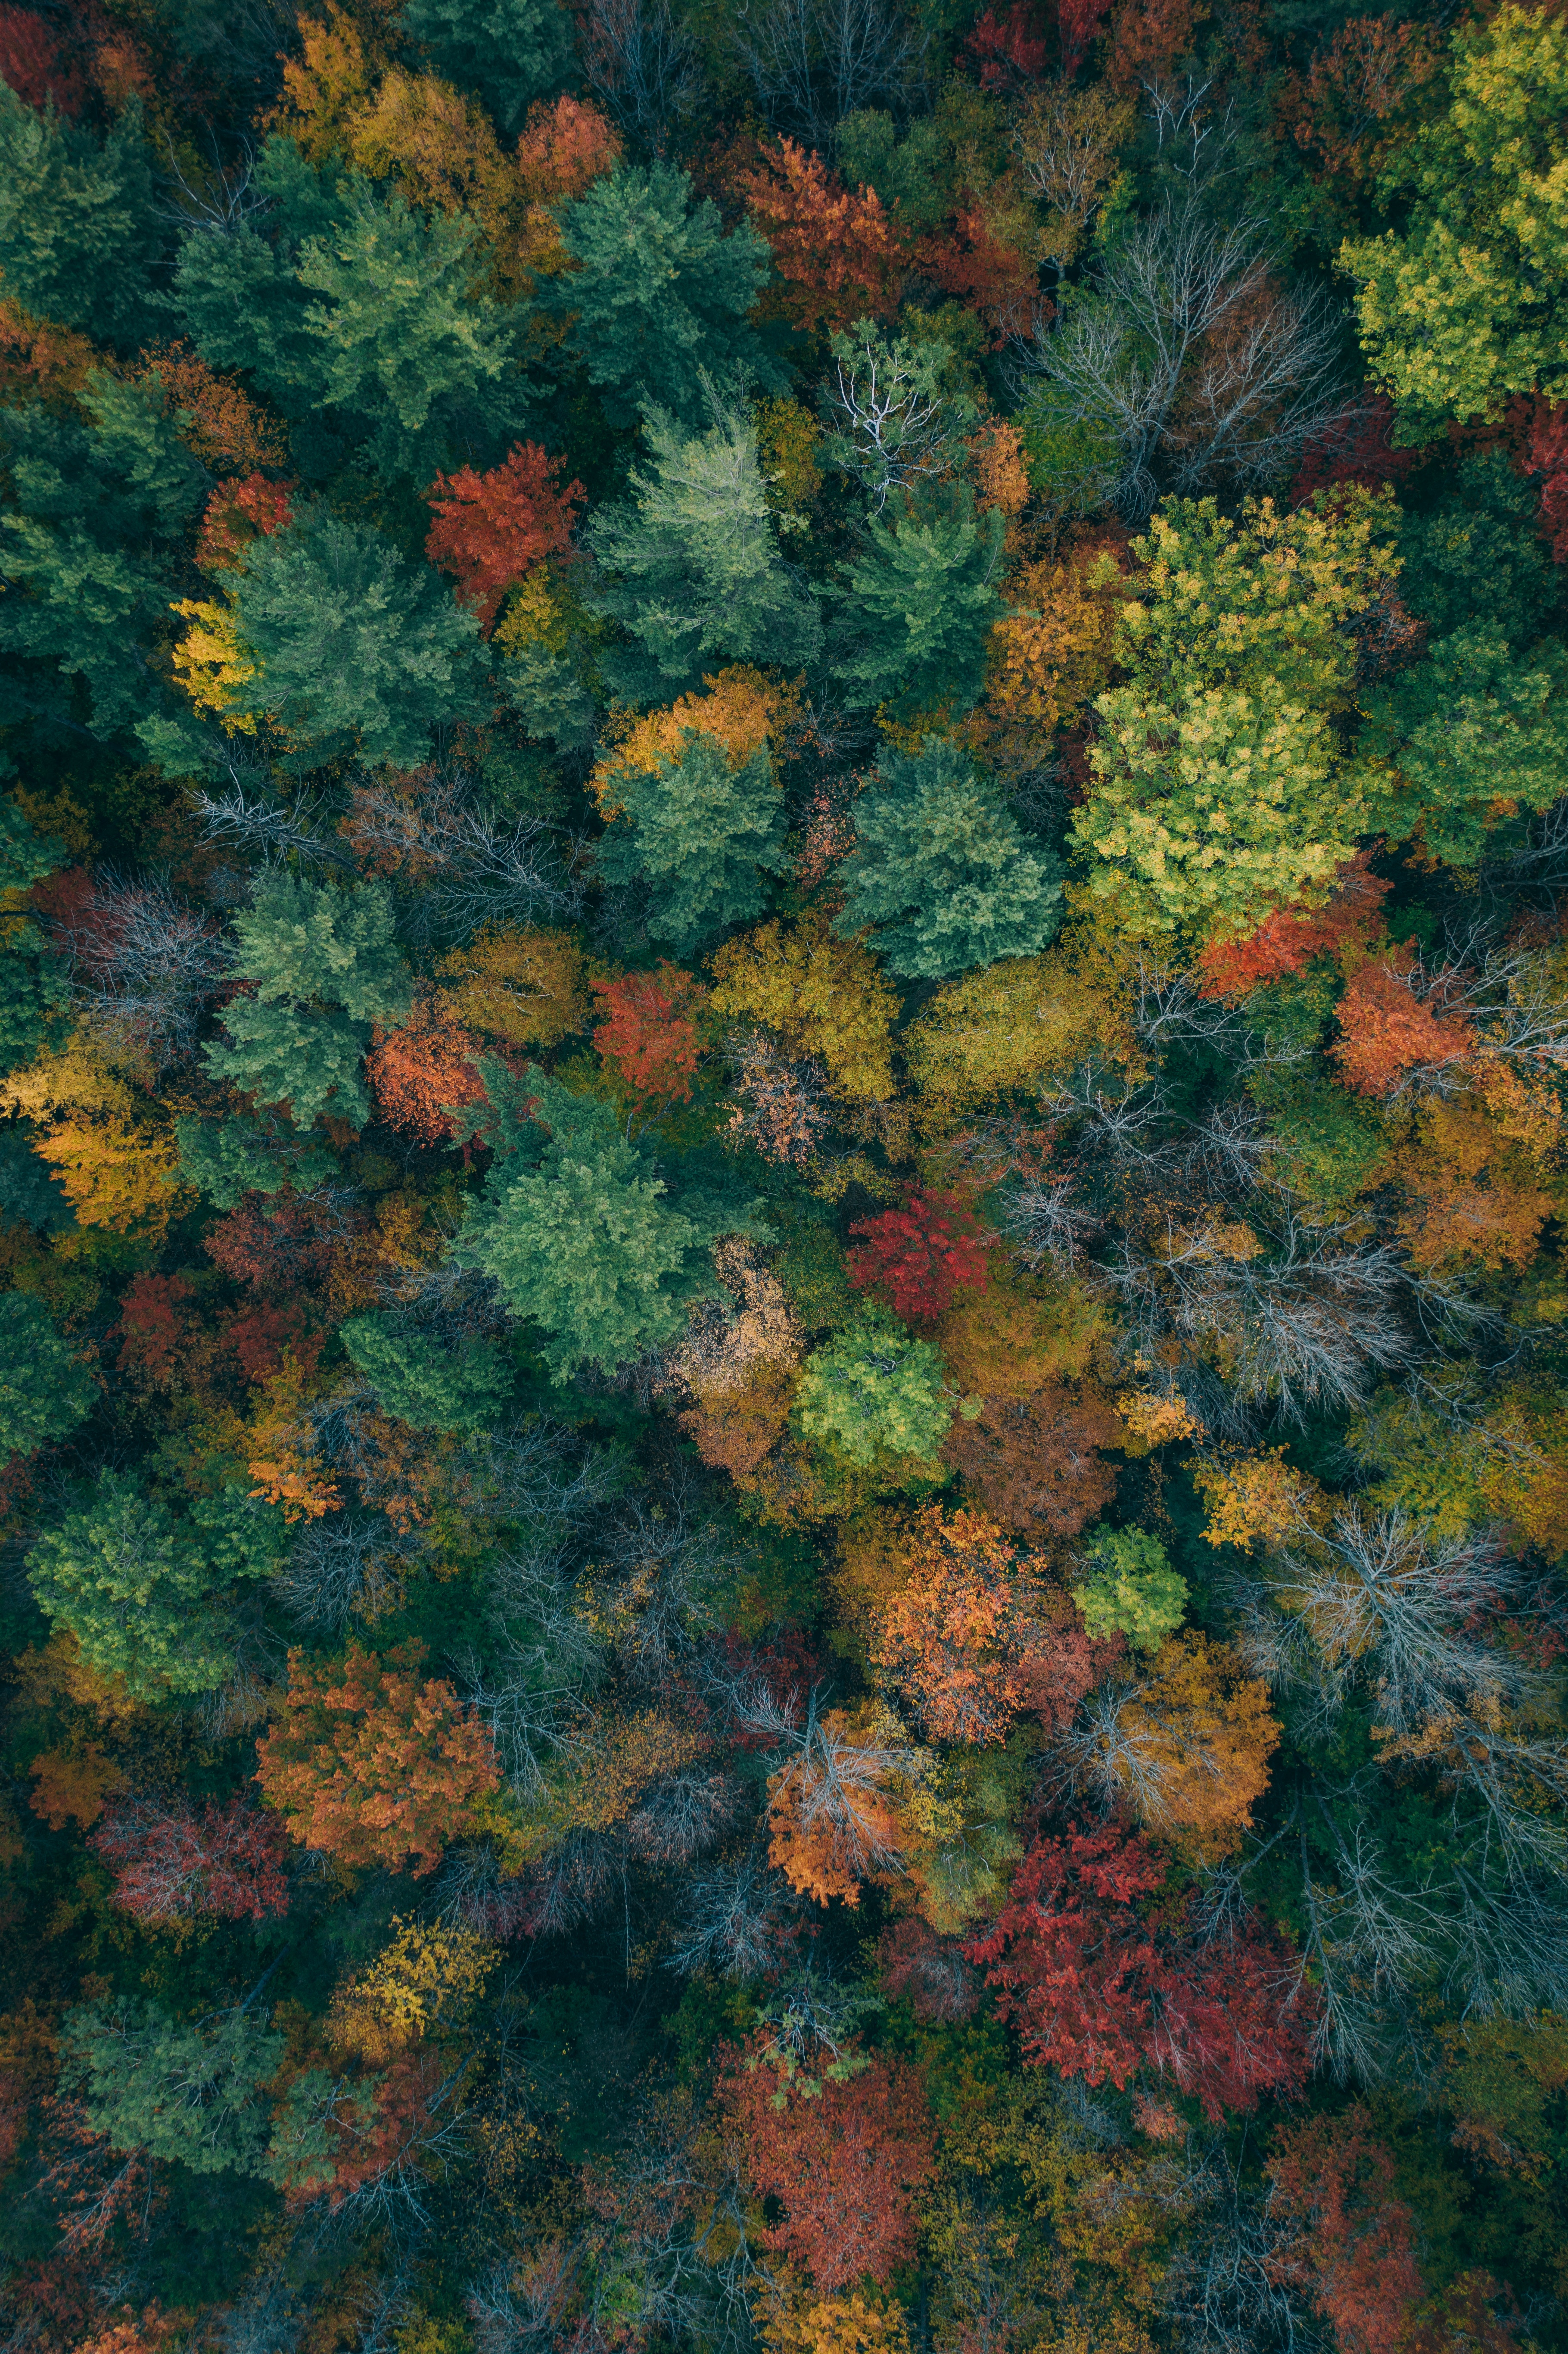 forest, colorful, nature, autumn colors, autumn, autumn paints, trees, view from above, colourful High Definition image